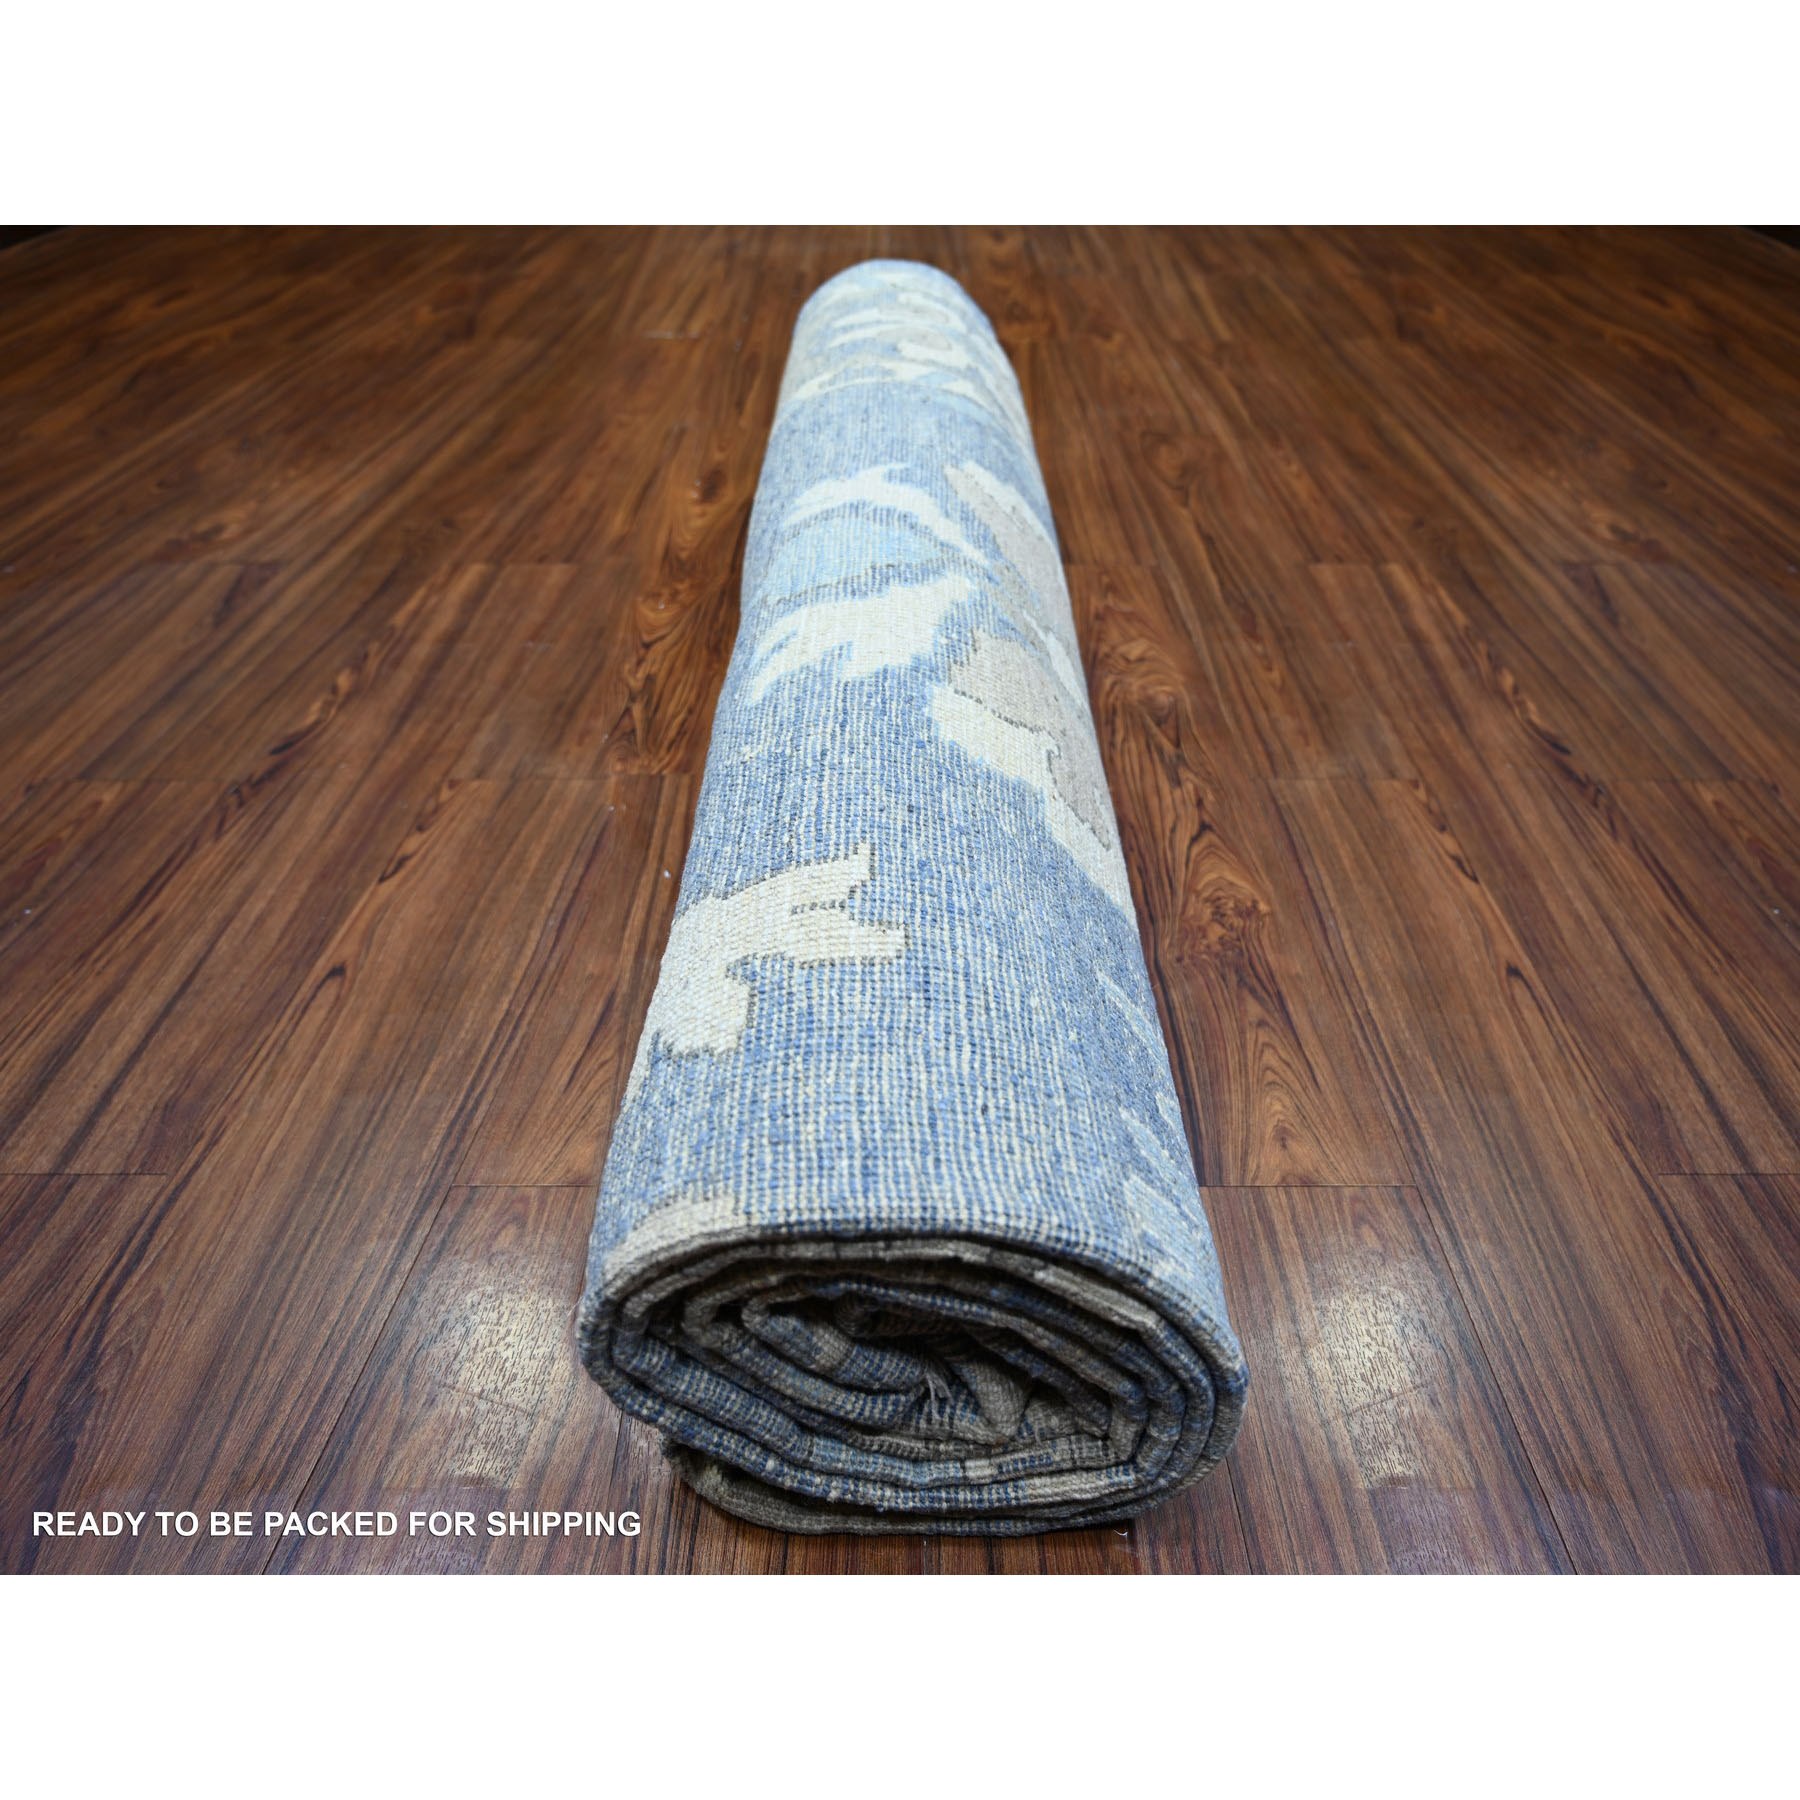 9'3"x11'7" Steel Blue, Afghan Angora Oushak with Large Motifs Natural Dyes, Natural Wool Hand Woven, Oriental Rug 